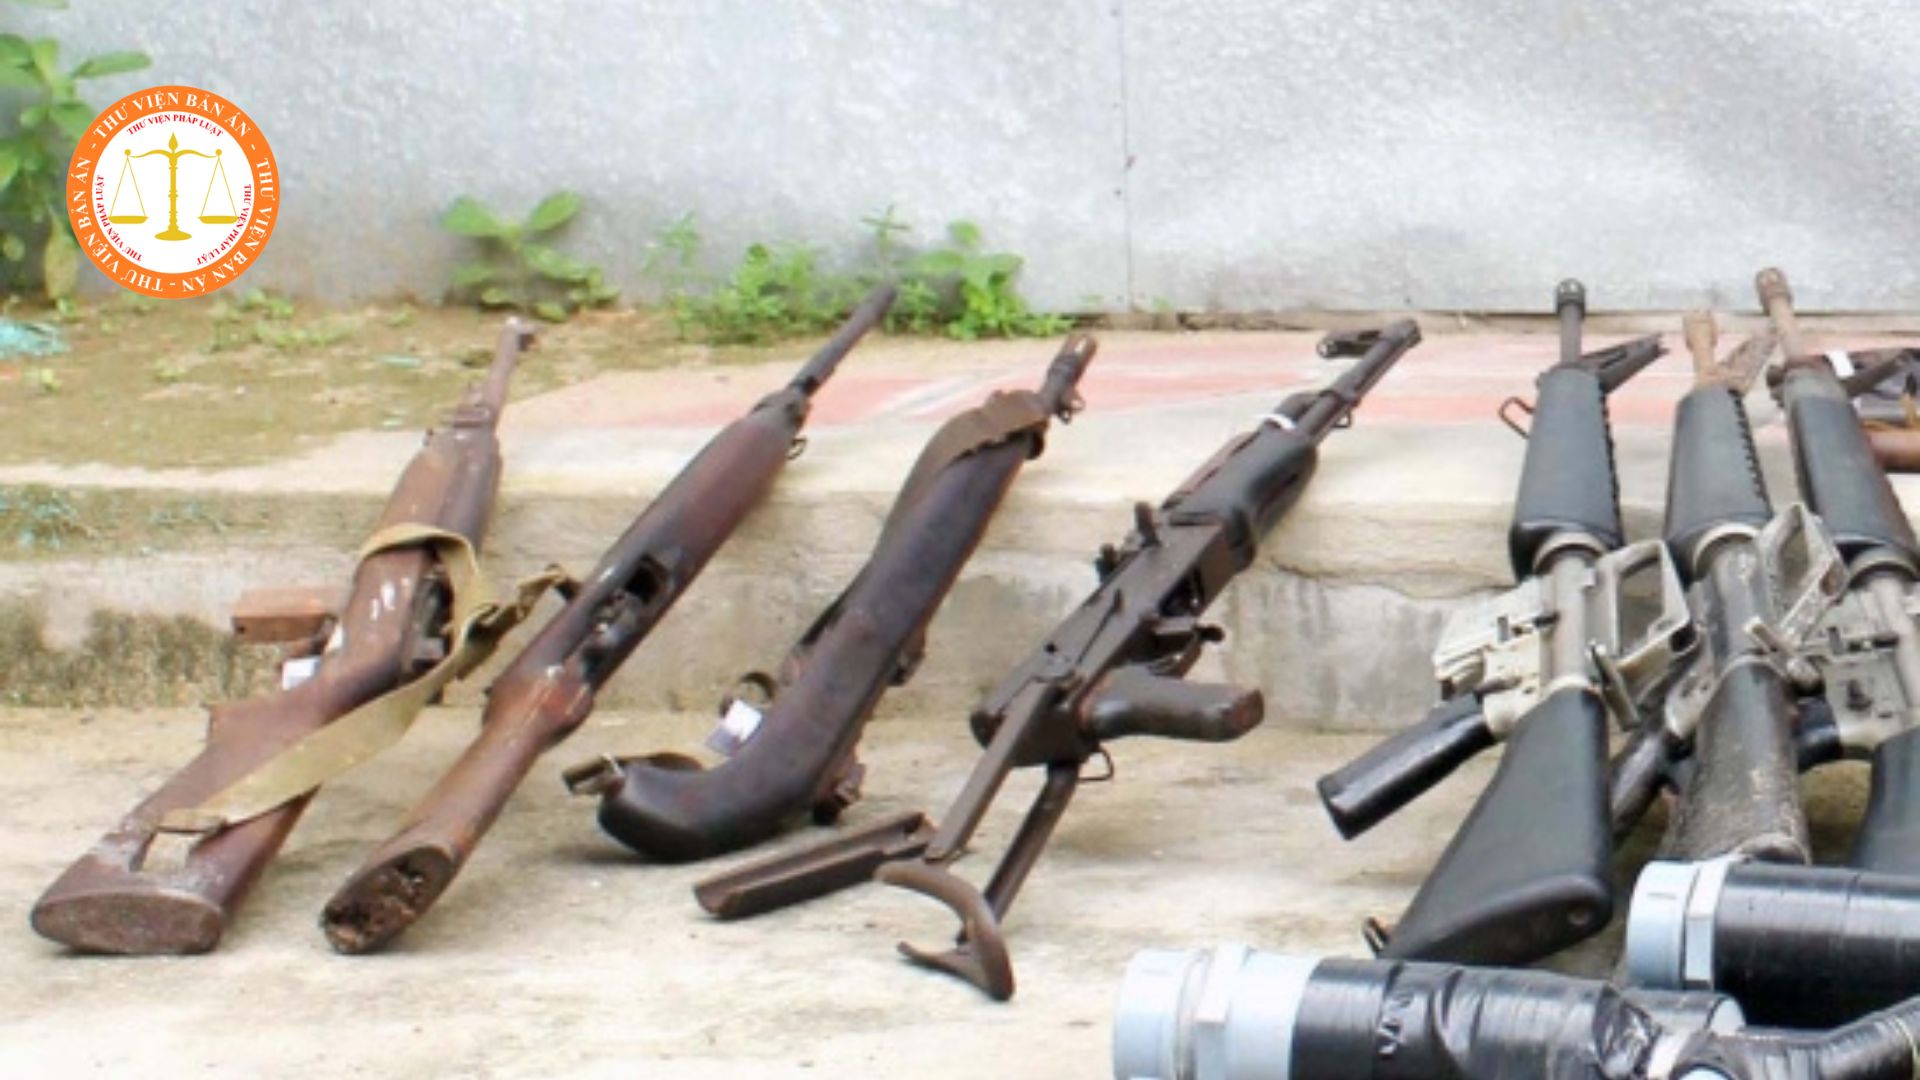  Are businesses allowed to invest in trading military weapons in Vietnam?